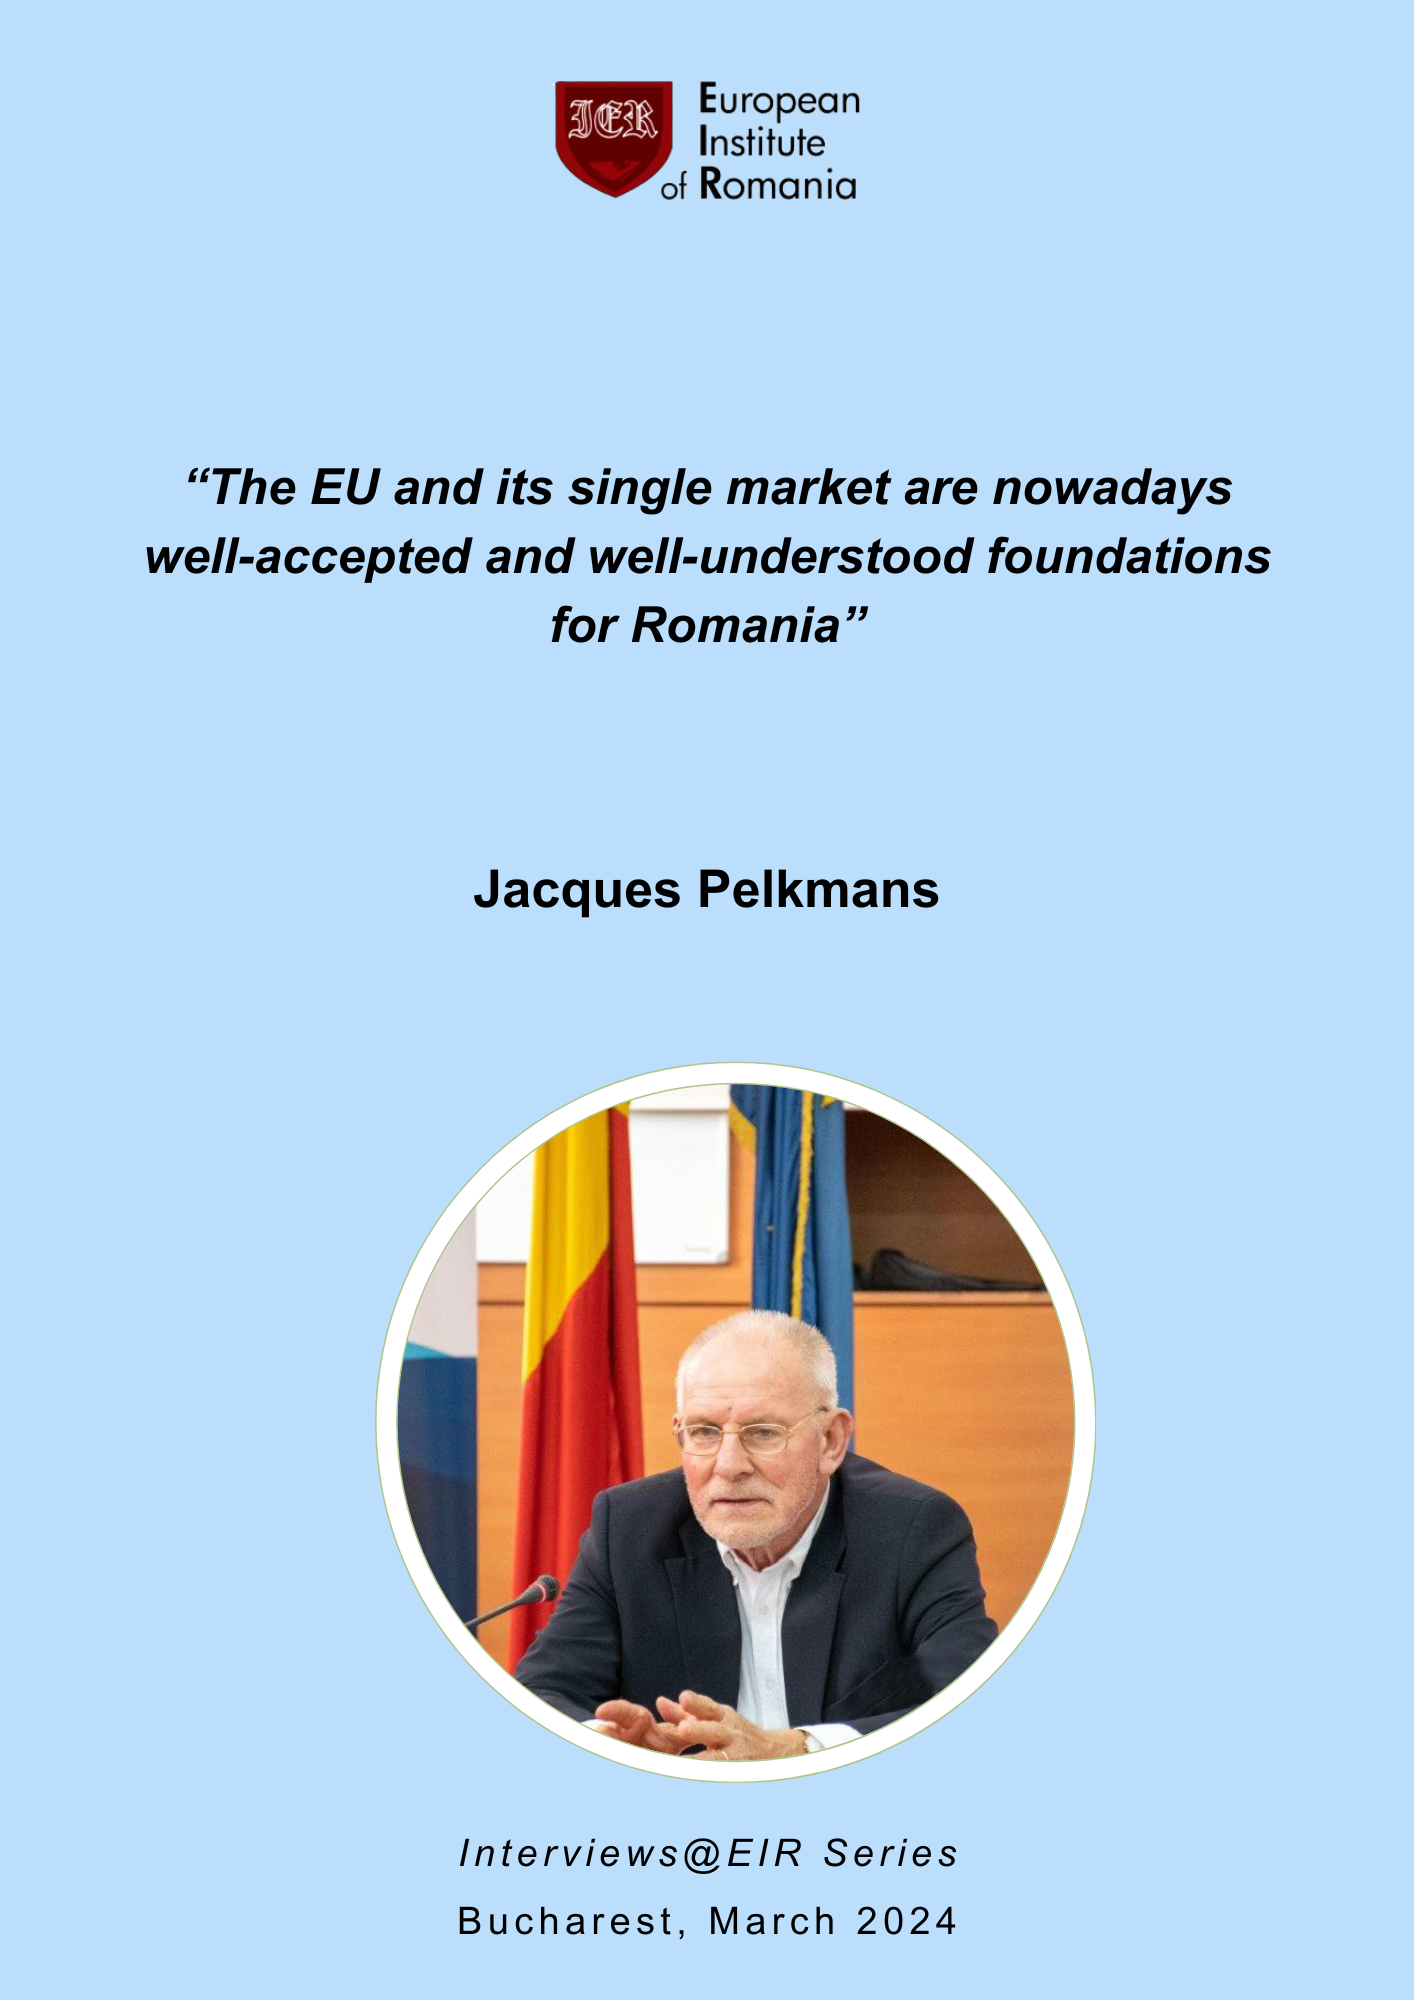 Interview with Mr. Jacques Pelkmans – The EU and its single market are nowadays well-accepted and well-understood foundations for Romania